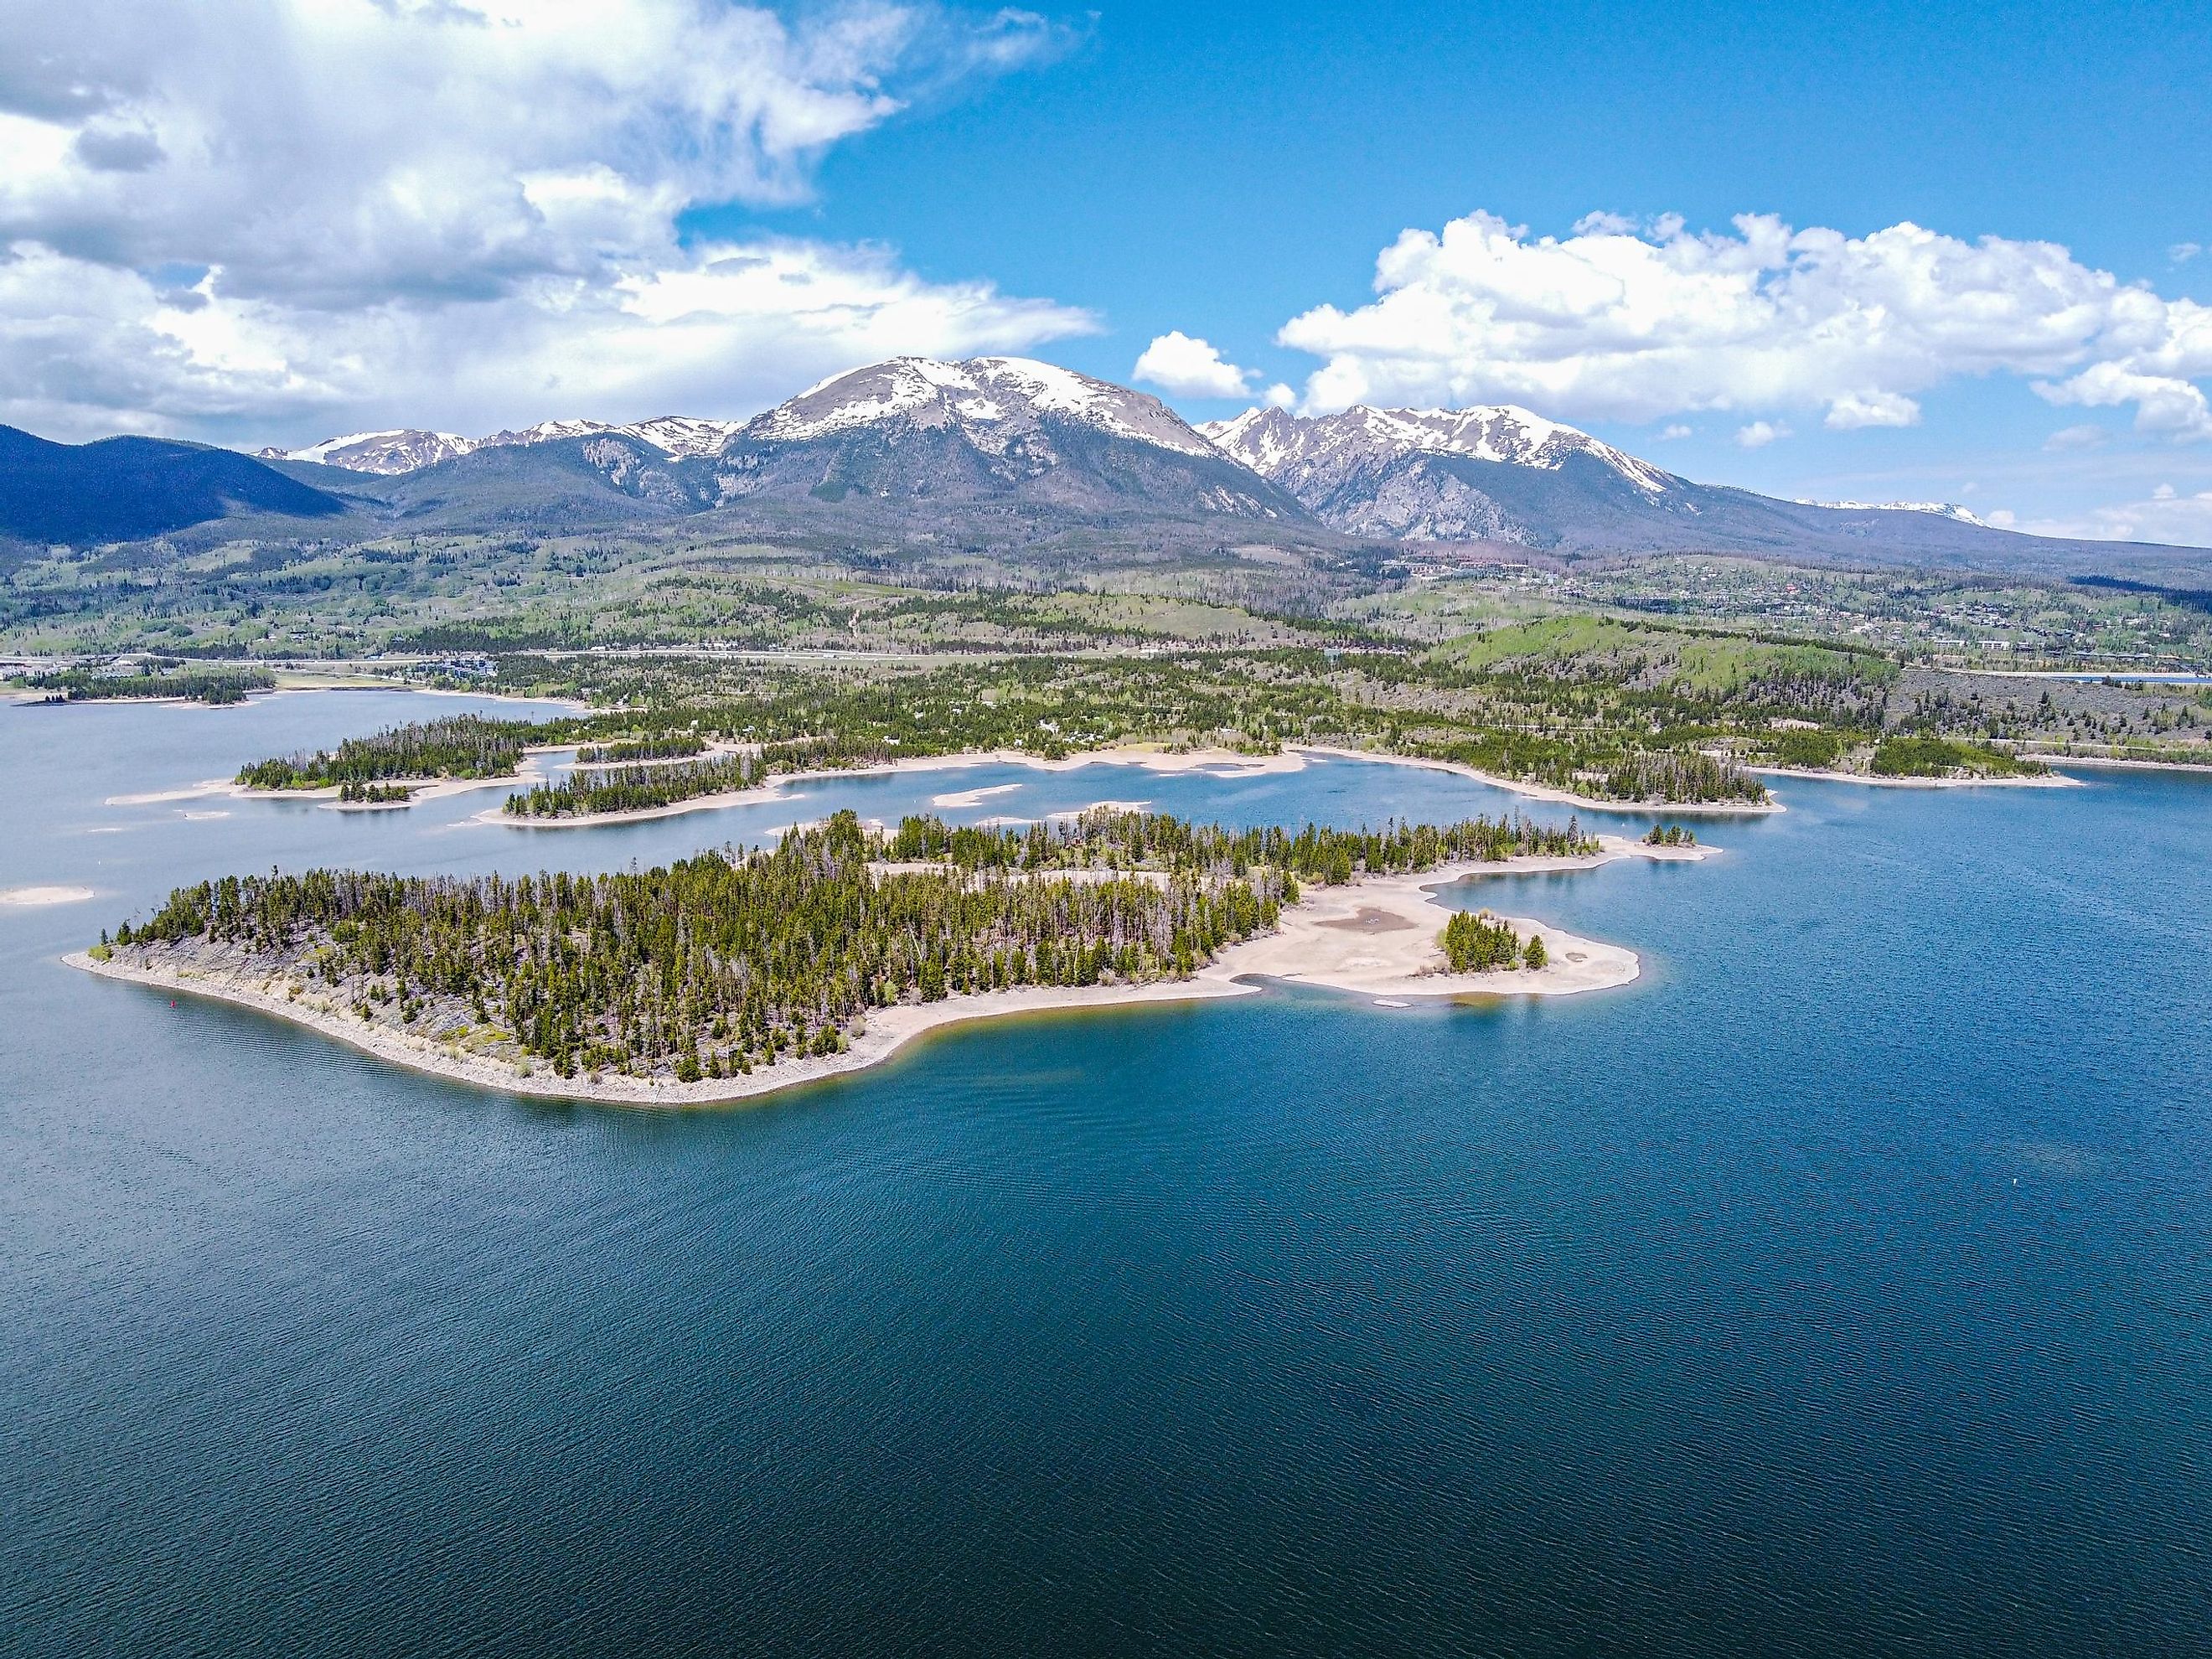 Aerial photography around the Dillon Reservoir in Colorado